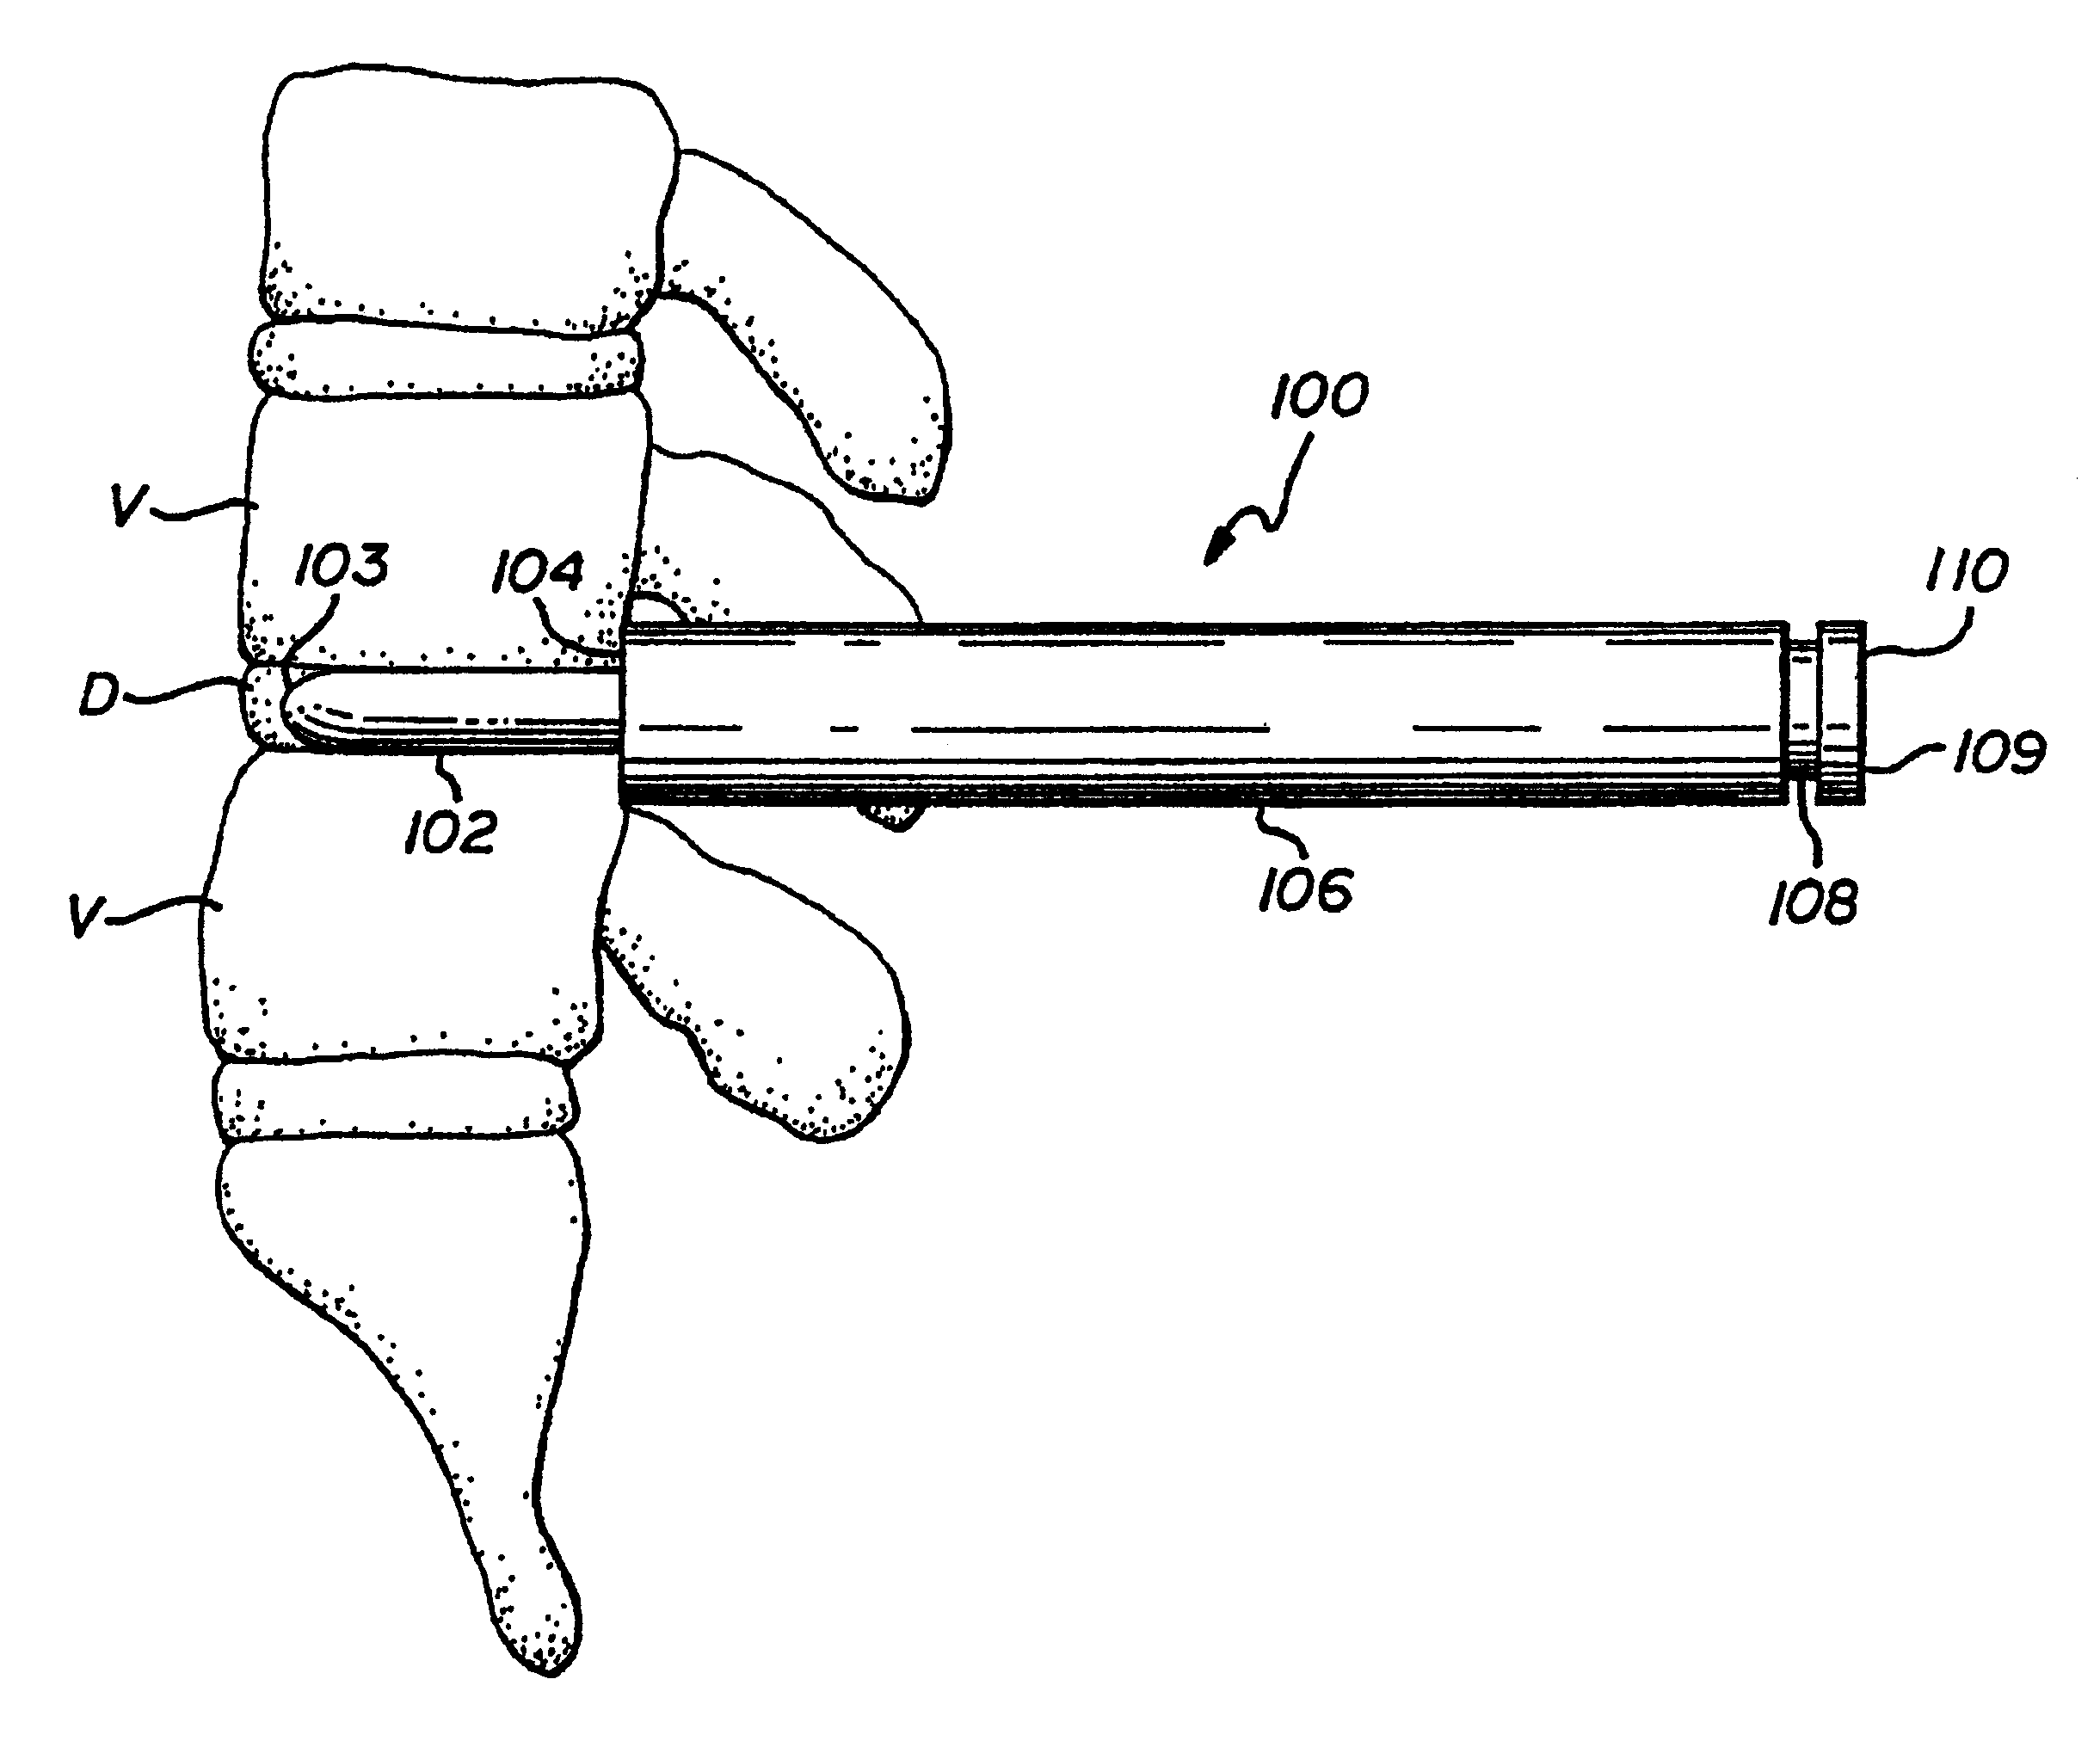 Method for inserting spinal implants and for securing a guard to the spine